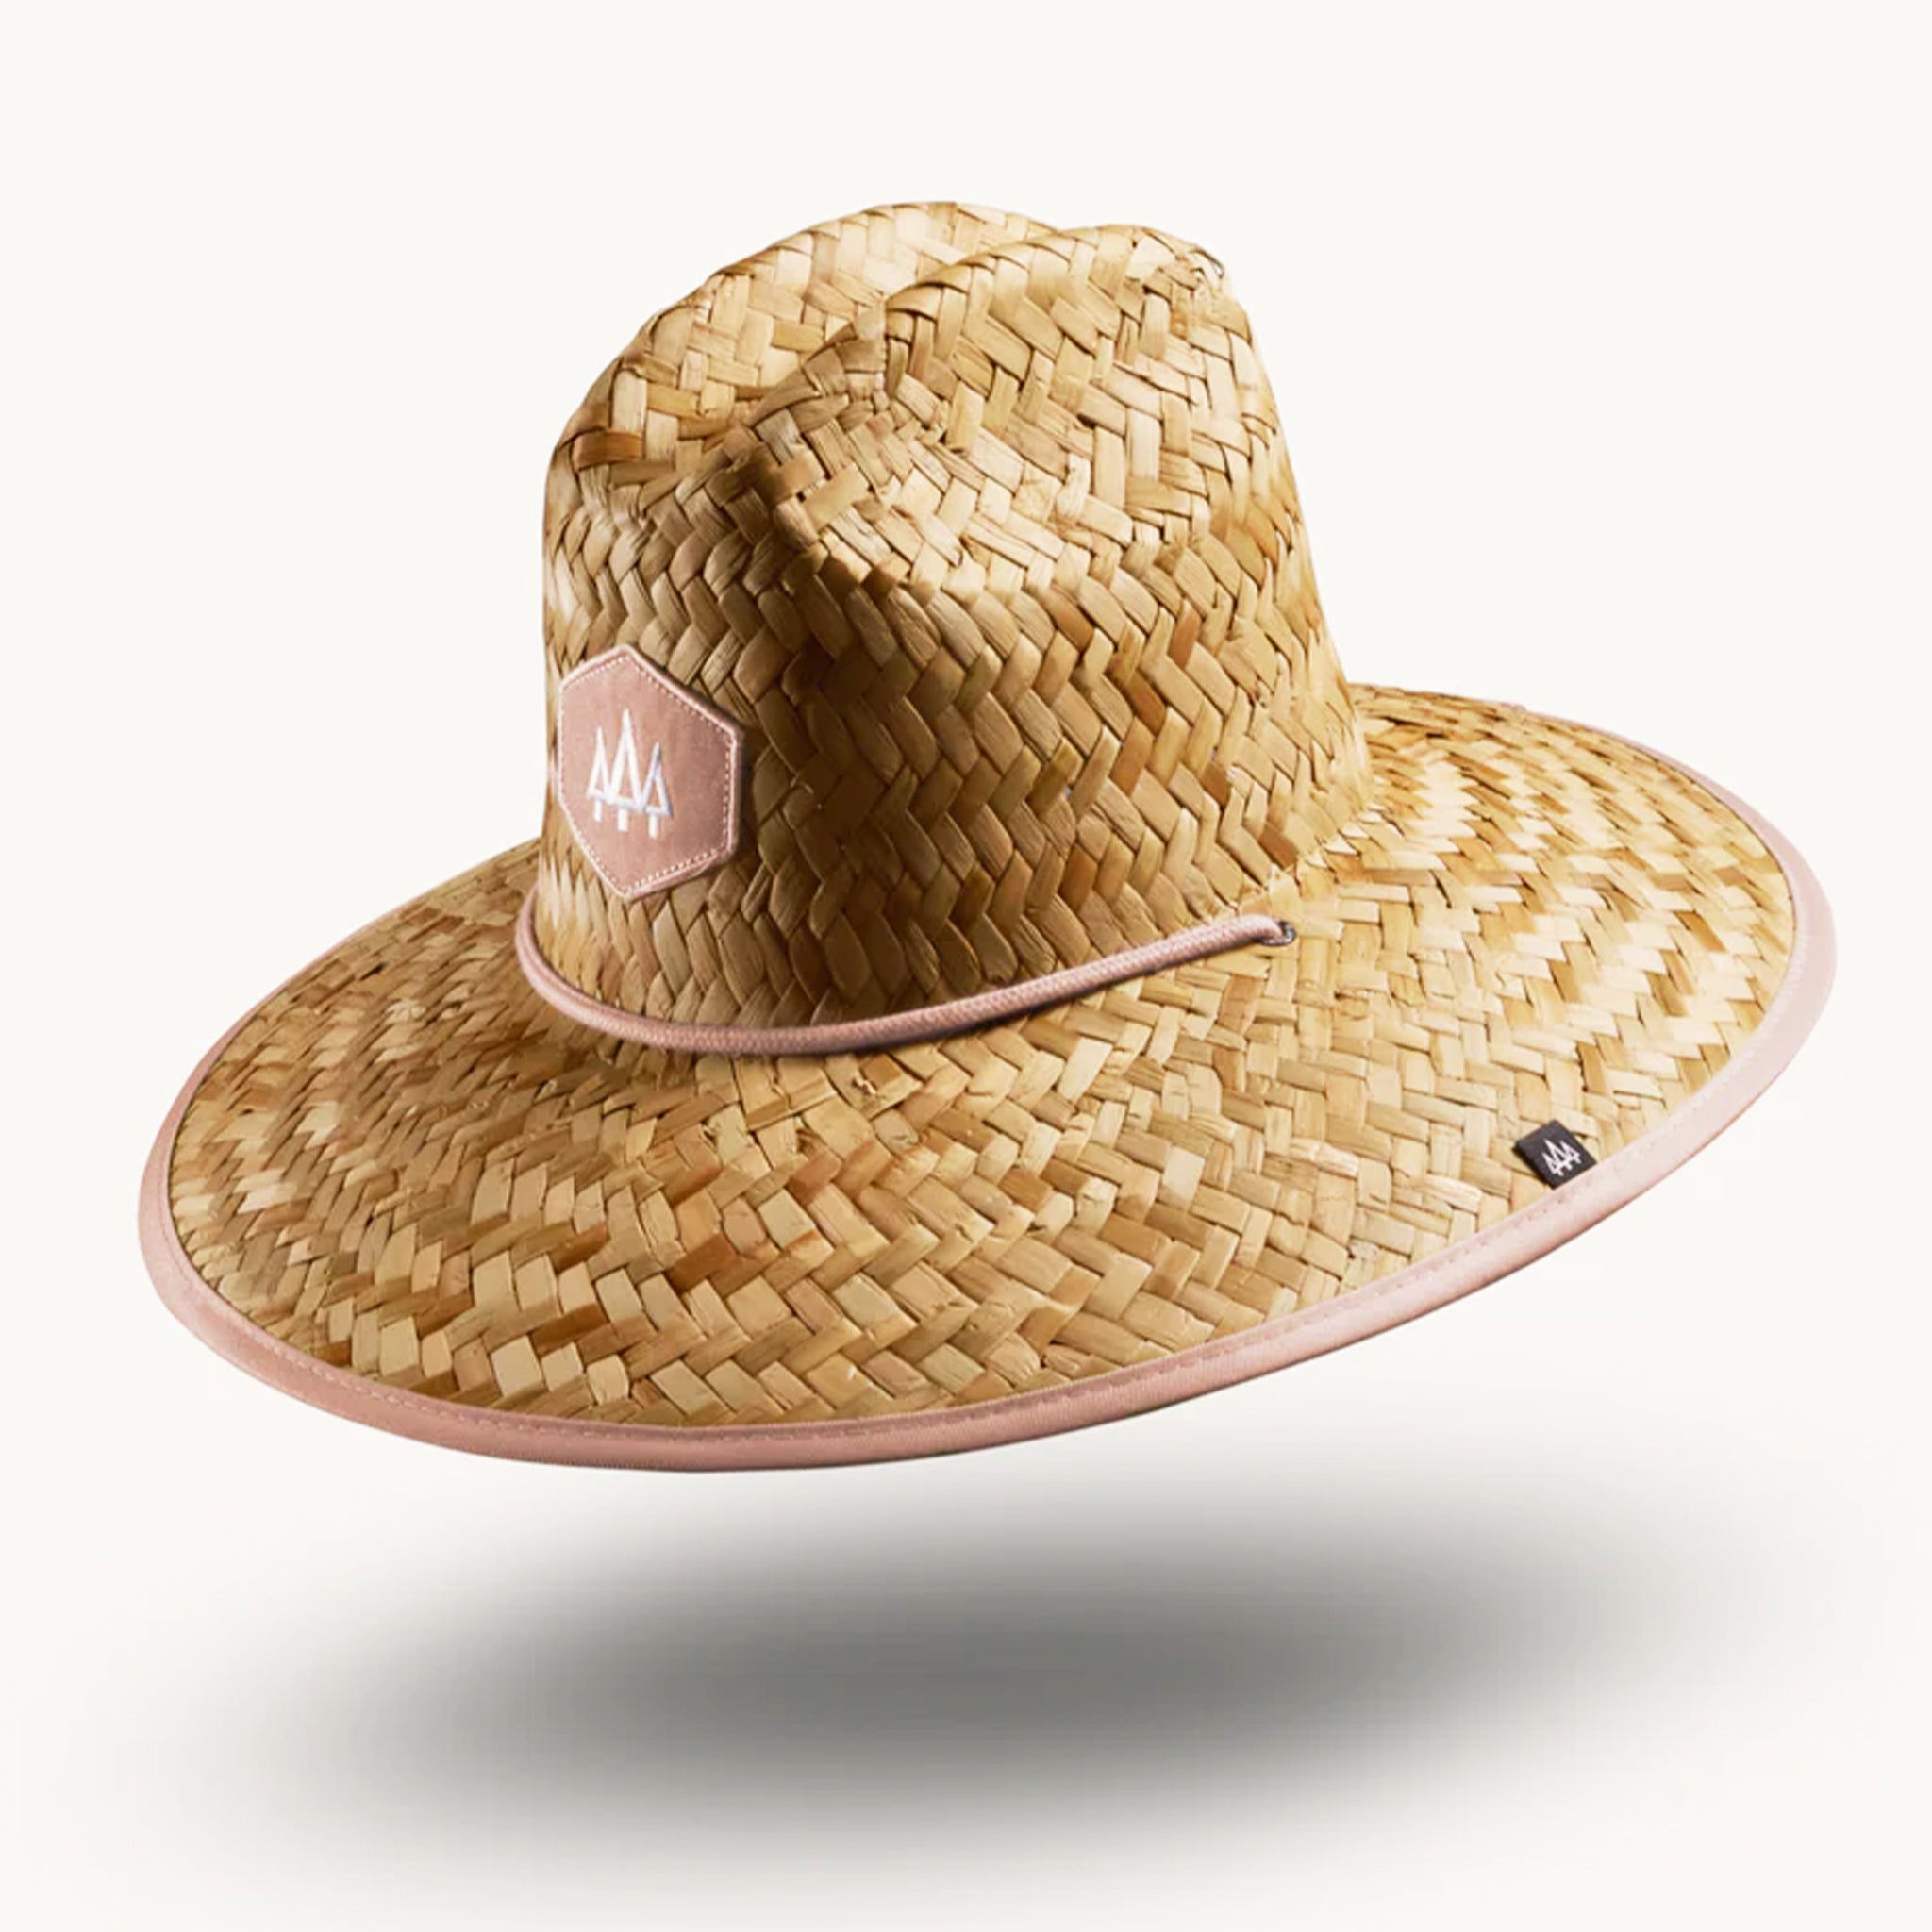 On a white background is a straw hat with a neutral mauve / tan brim underneath and neck strap.